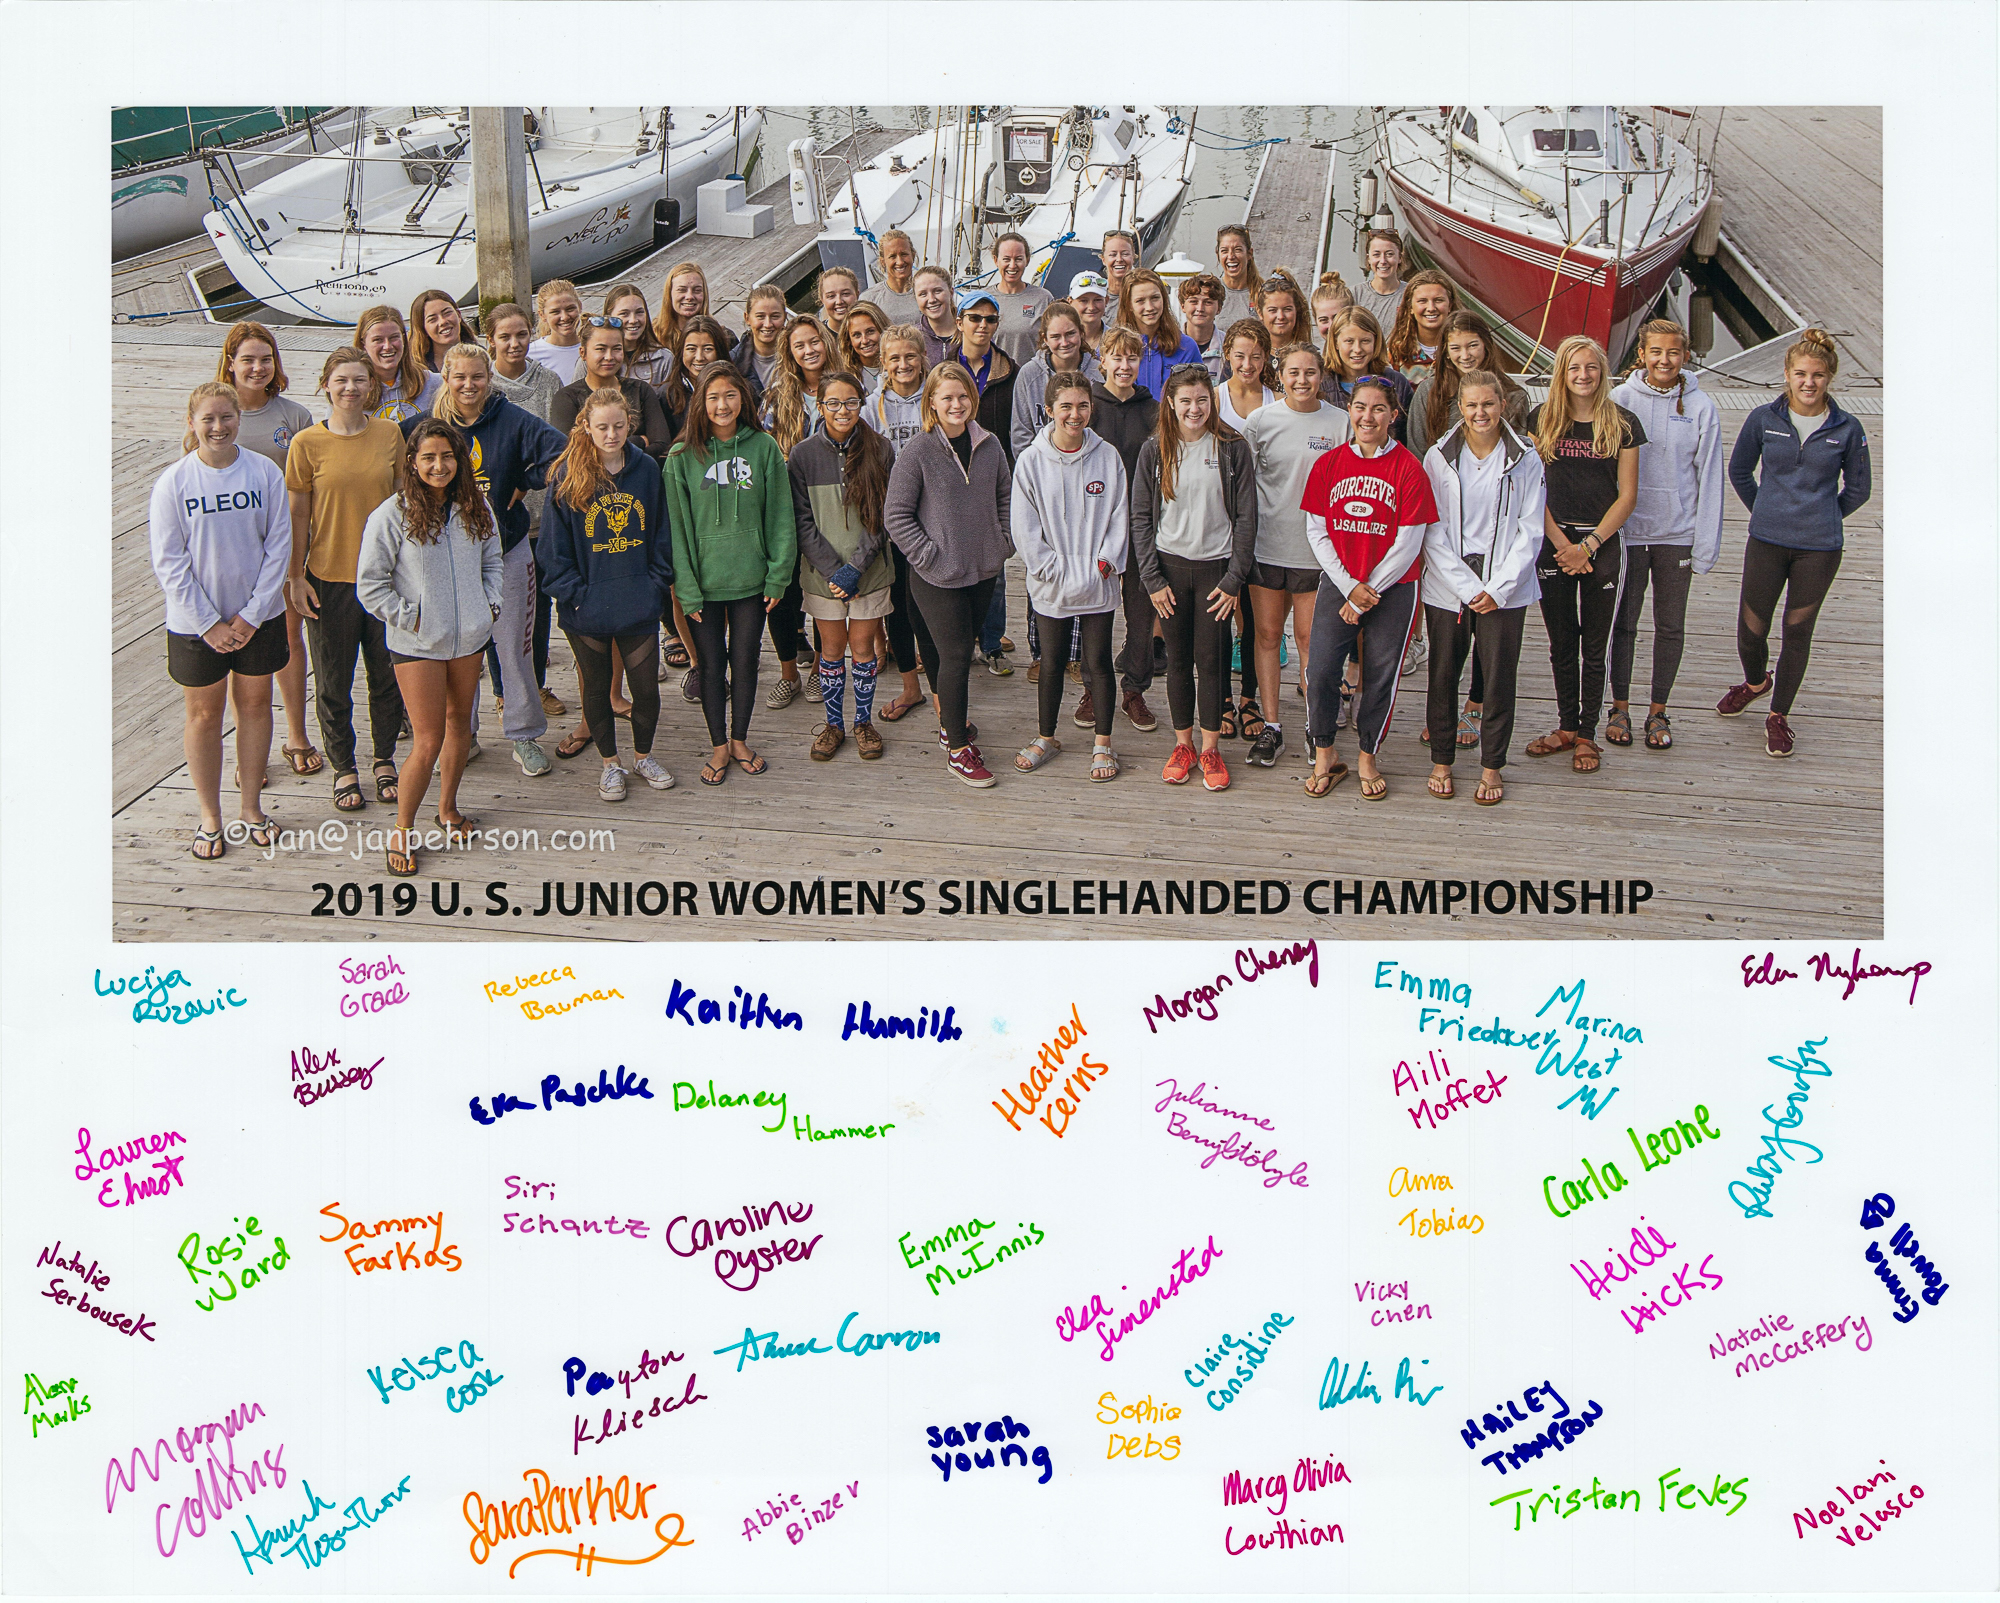 2019 U.S. JUNIOR WOMEN’S SINGLEHANDED CHAMPIONSHIP at the Richmond Yacht Club, July 2019 -- Group photo and signed poster